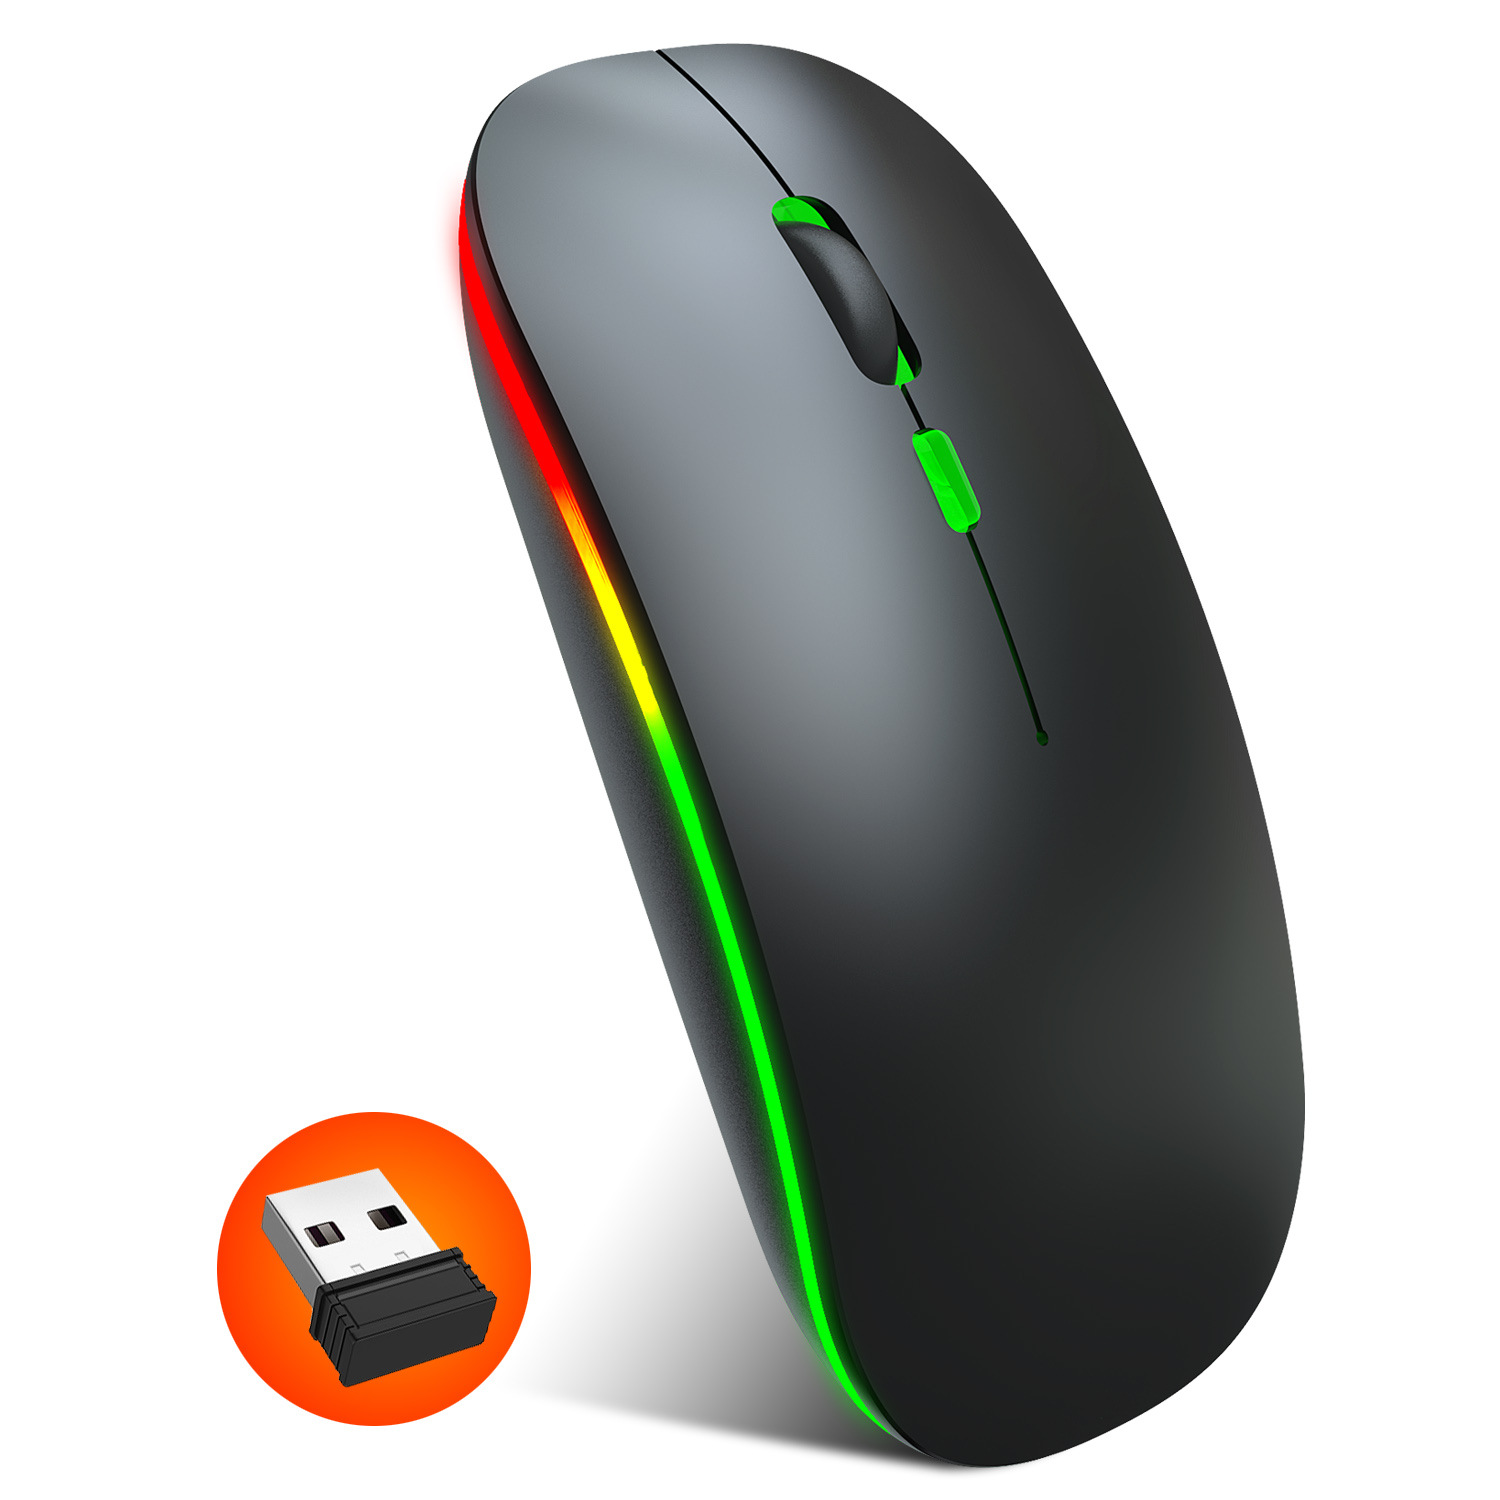 Wireless Optical Mouse M40 2.4G Colorful Luminous Rechargeable Mute Ultra-thin for PC Notebook Desktop Office black